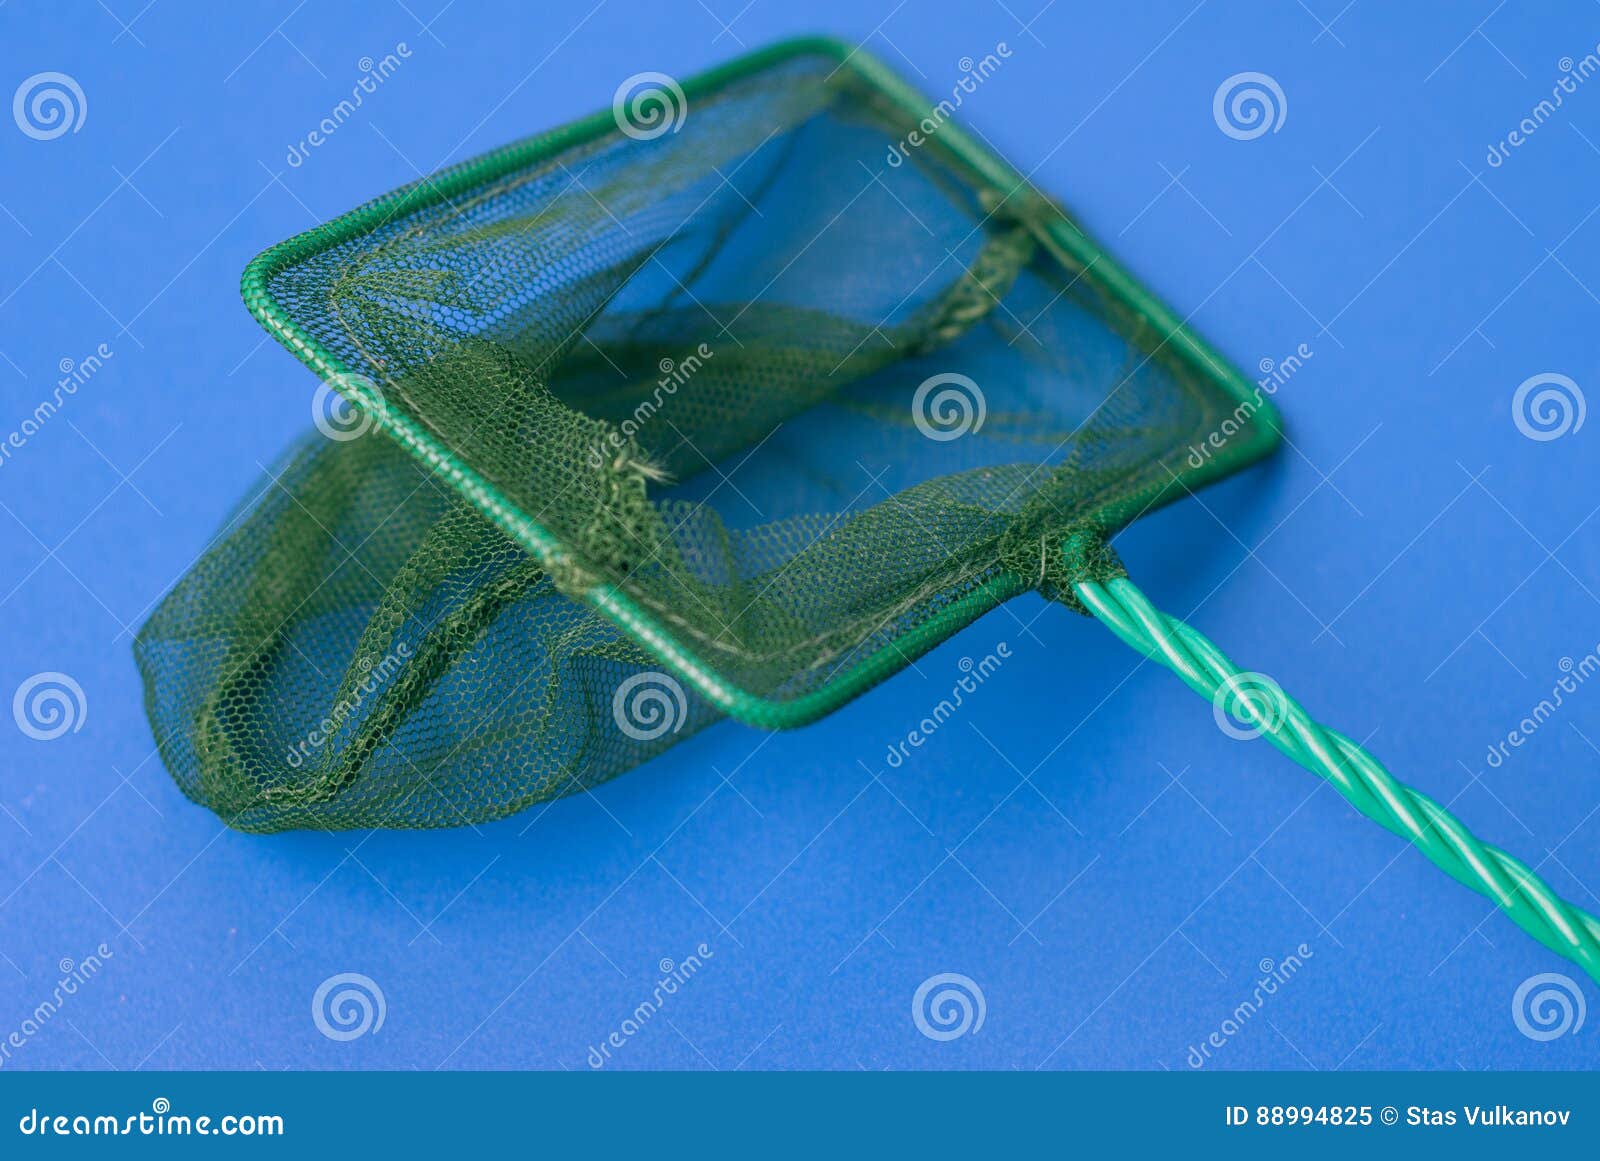 Green Net for Catching Fish from the Aquarium, Blue Background, Mesh with a  Small Cell Stock Image - Image of gear, catcher: 88994825